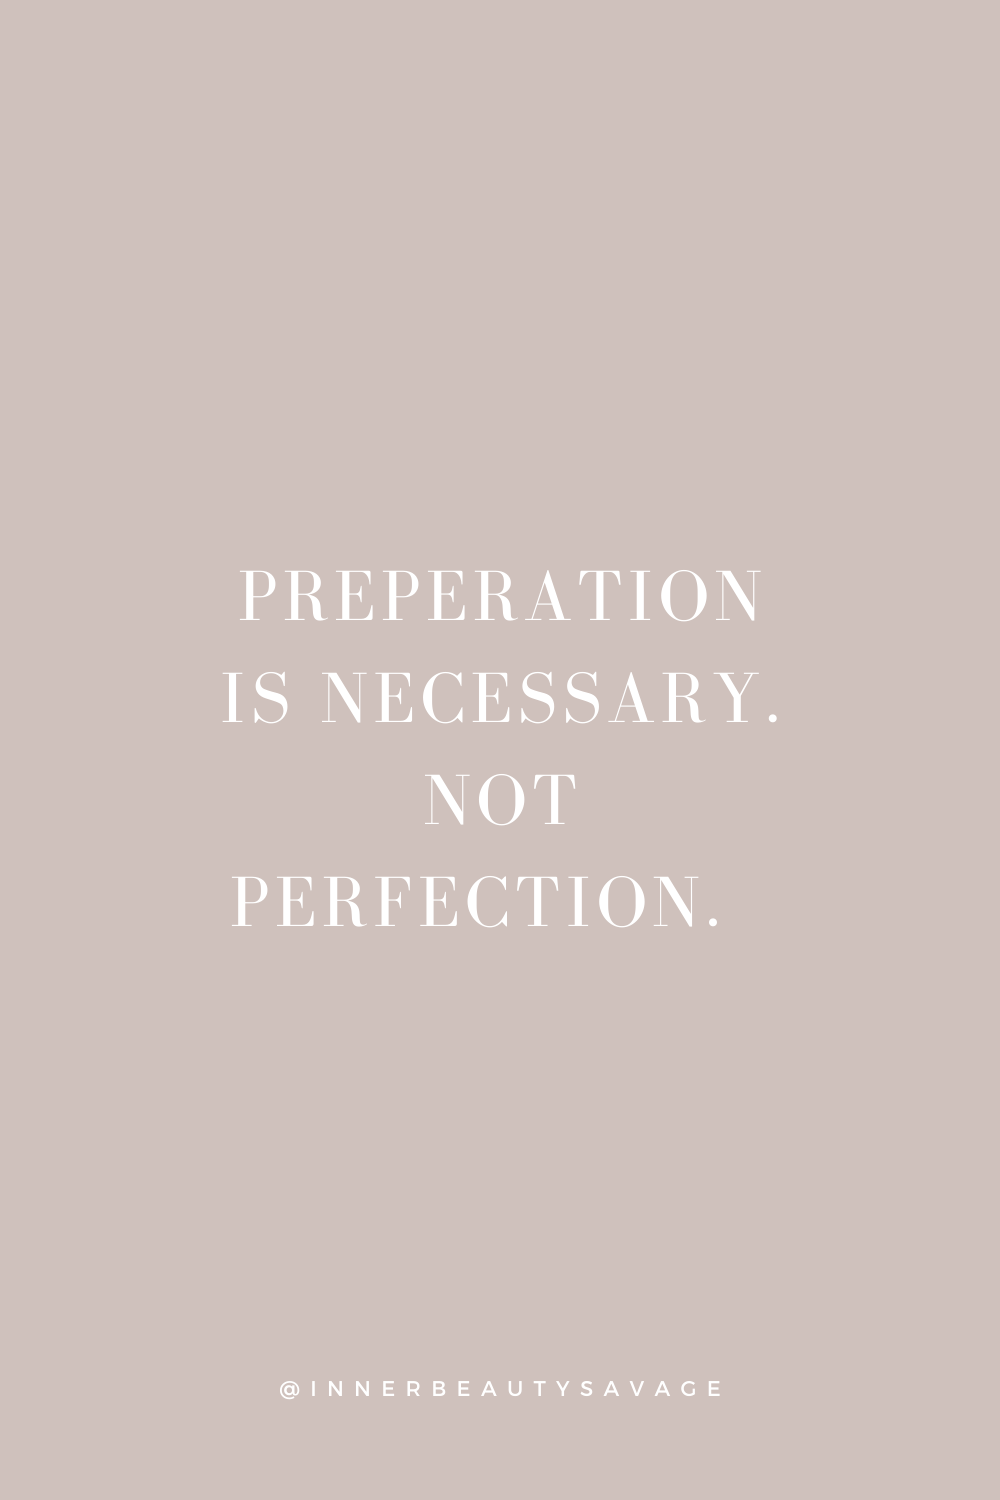 quote on perfectionism vs preperation